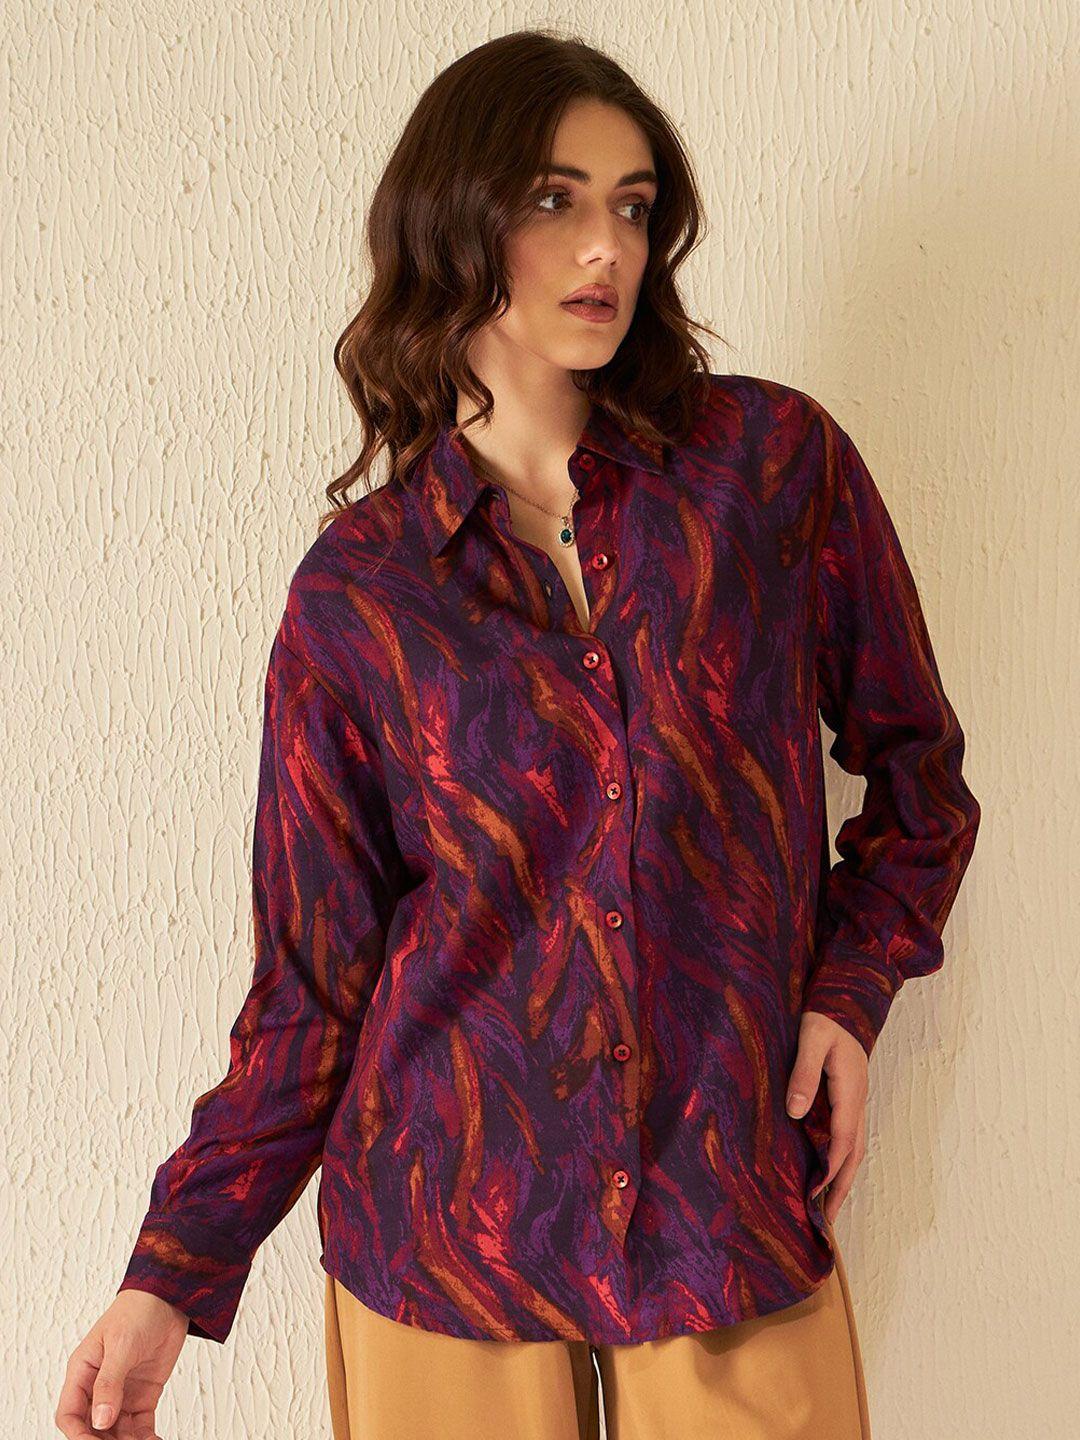 dennison smart abstract printed casual shirt